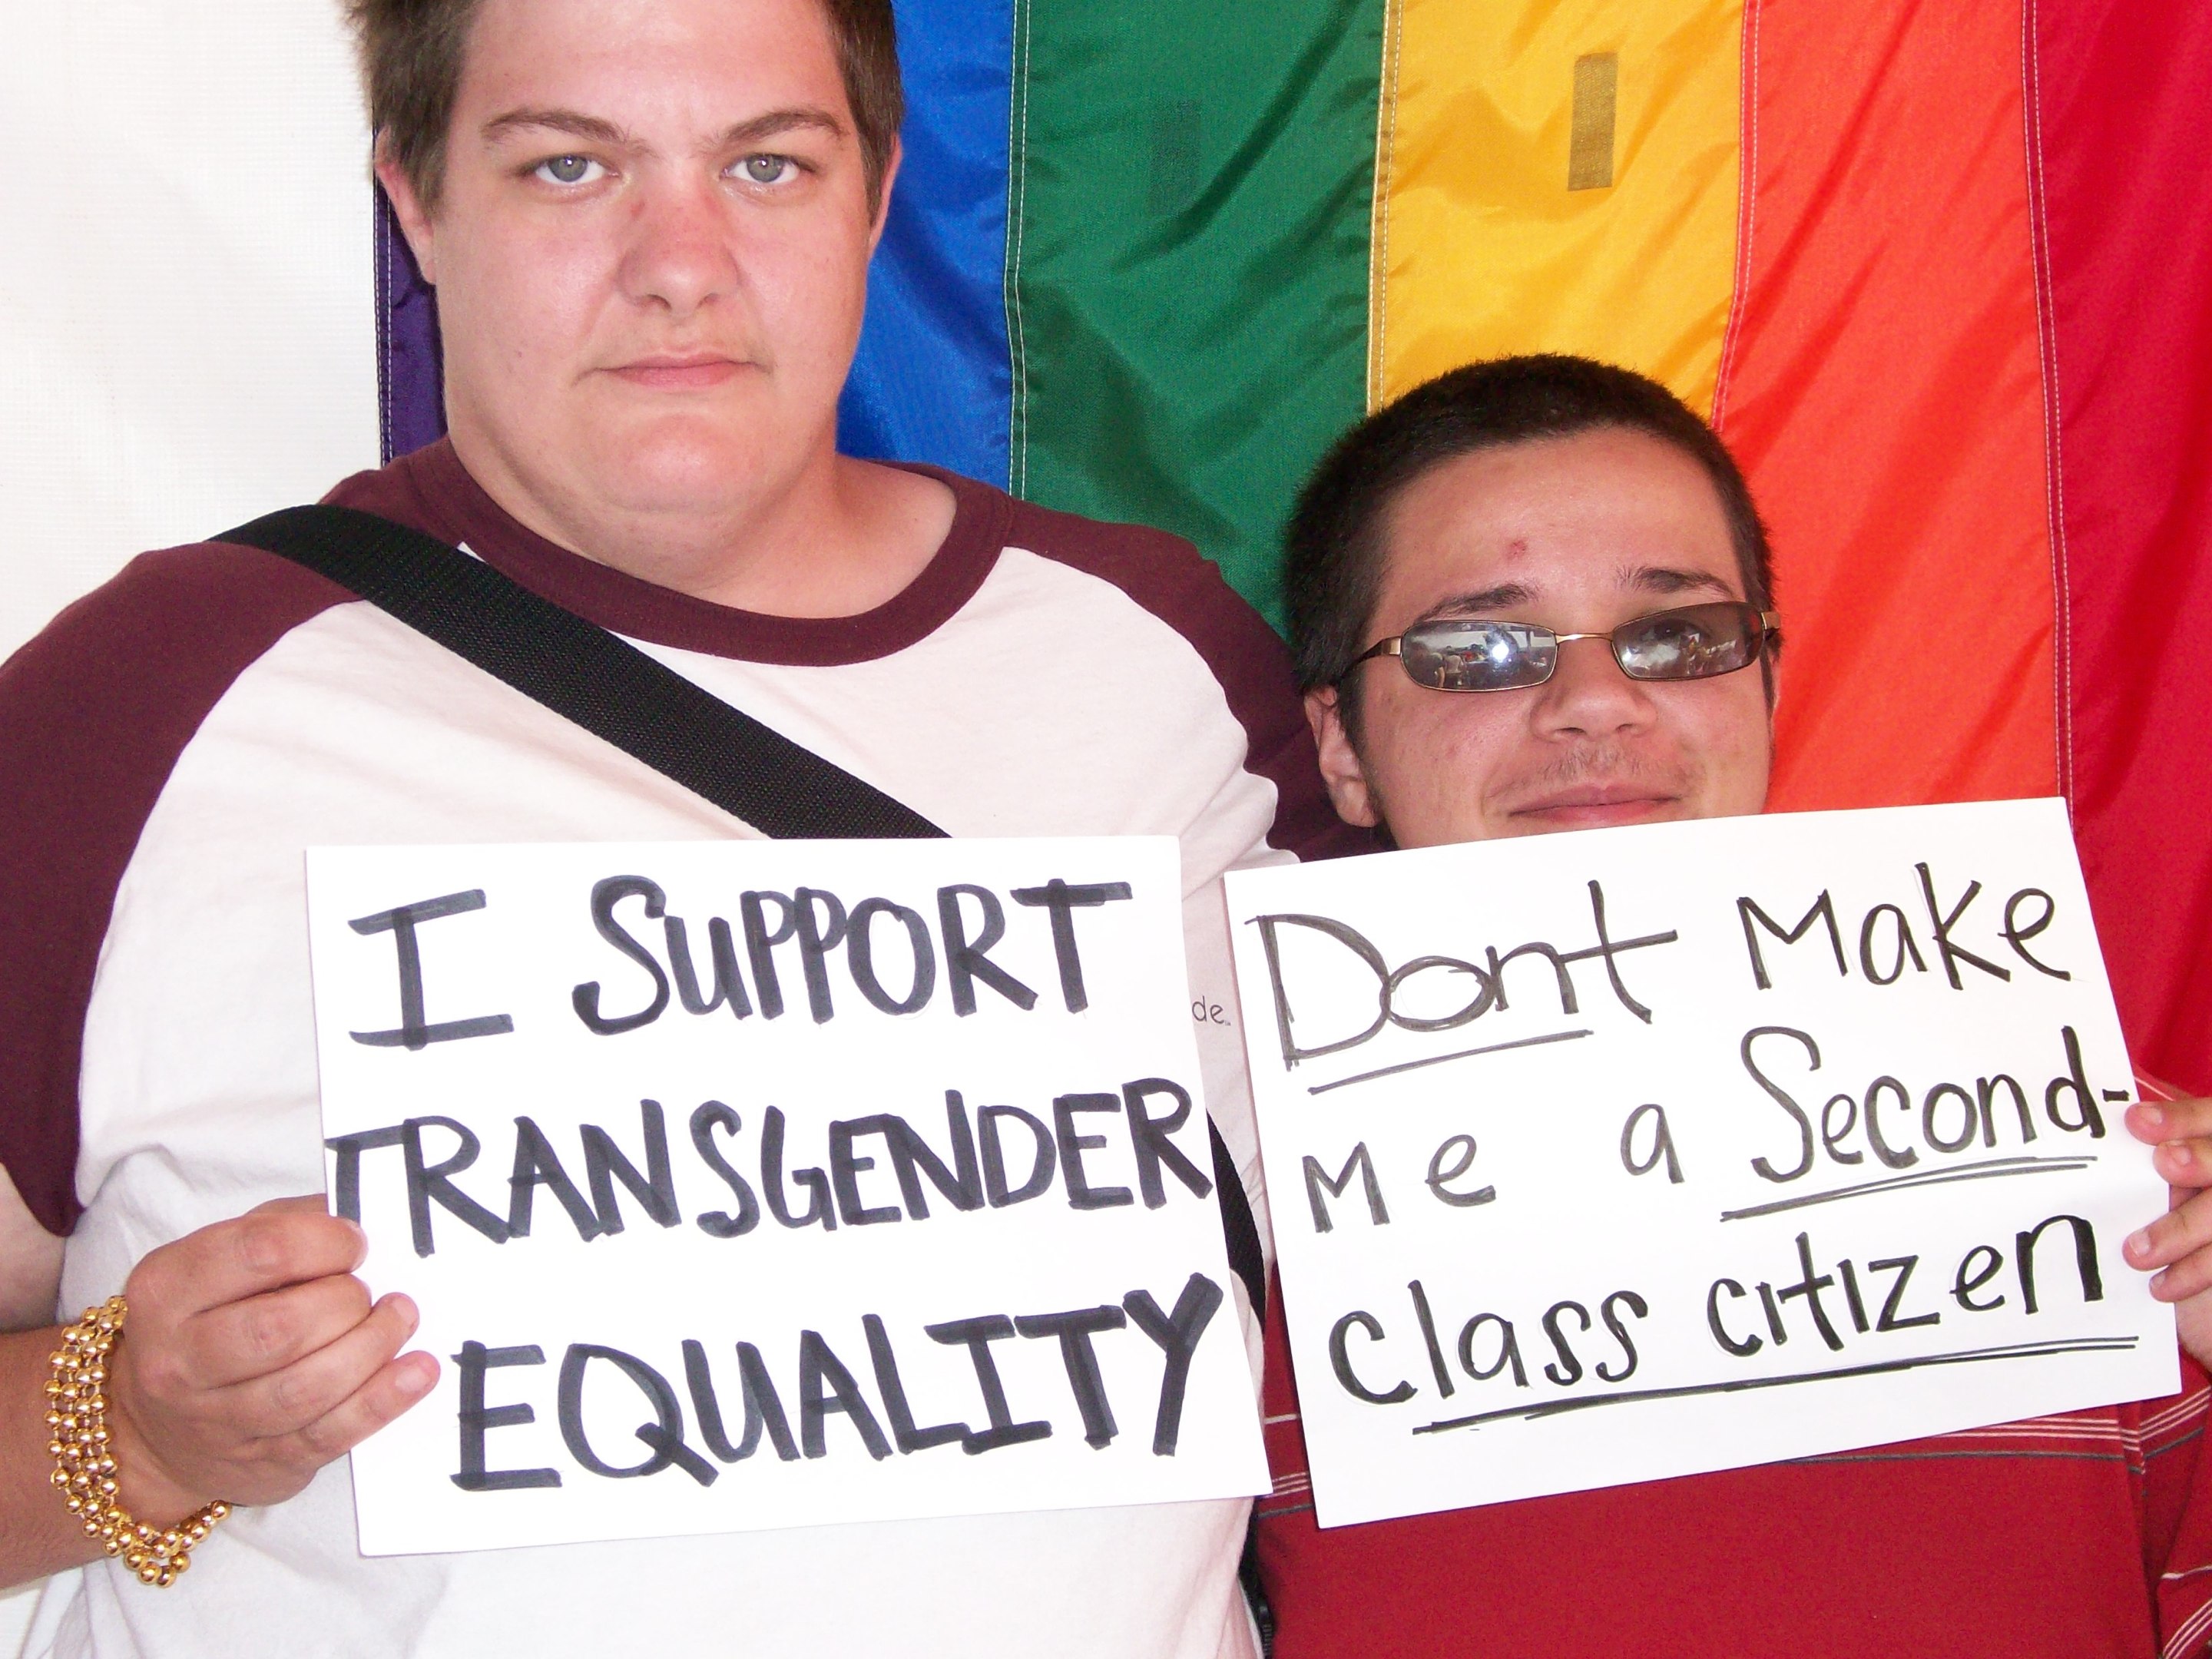 Two individuals pose in front of rainbow banner with signs reading "I Support Transgender Equality" and "Don't Make Me a Second-Class Citizen."